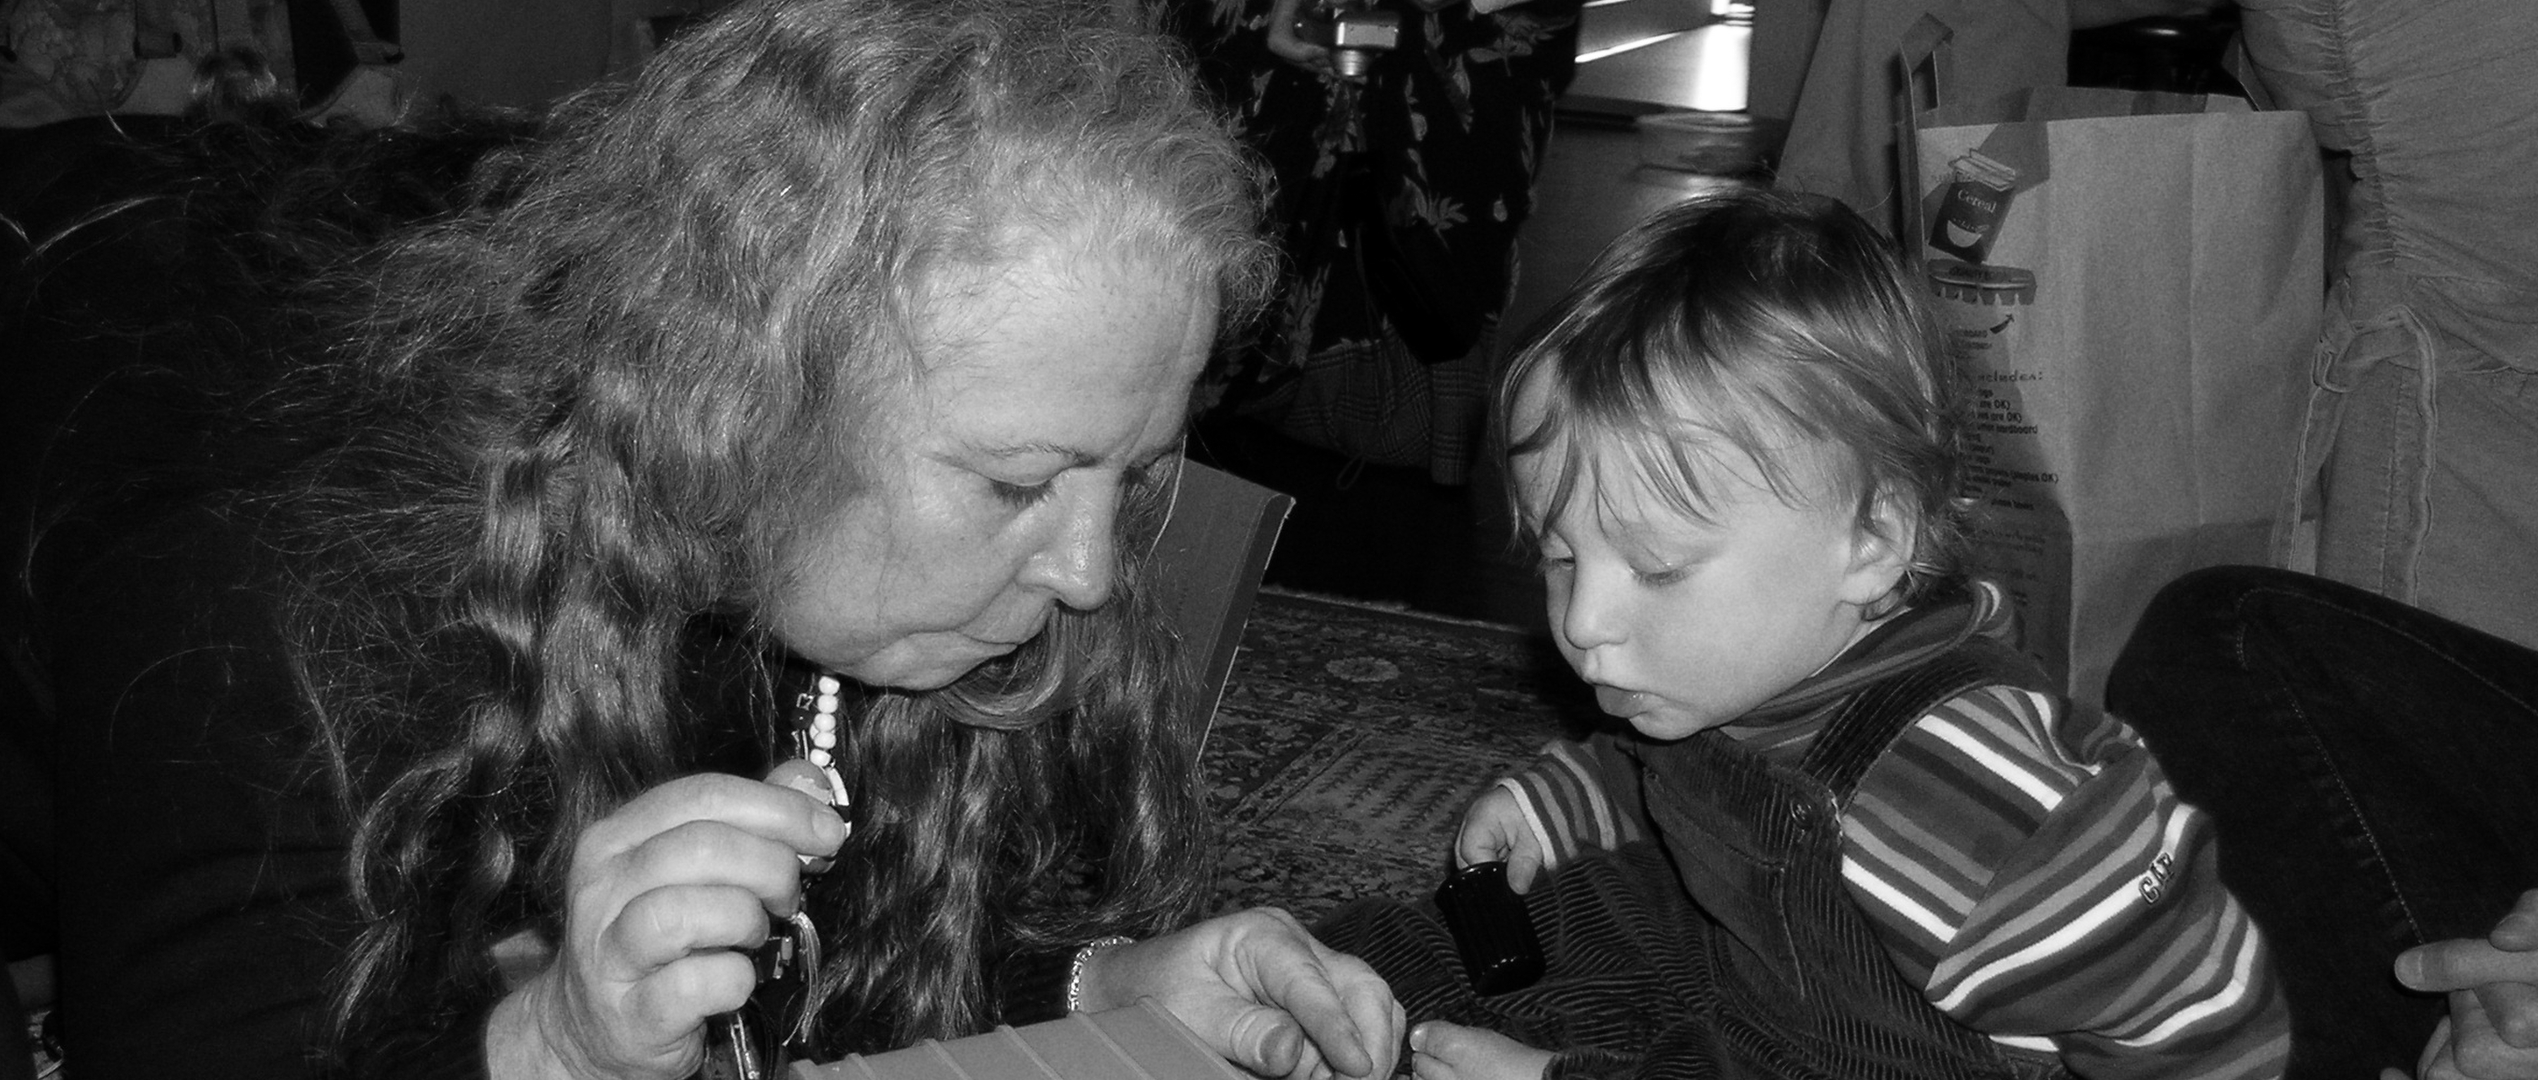 An older woman with long hair and a young boy in a black and white photo.